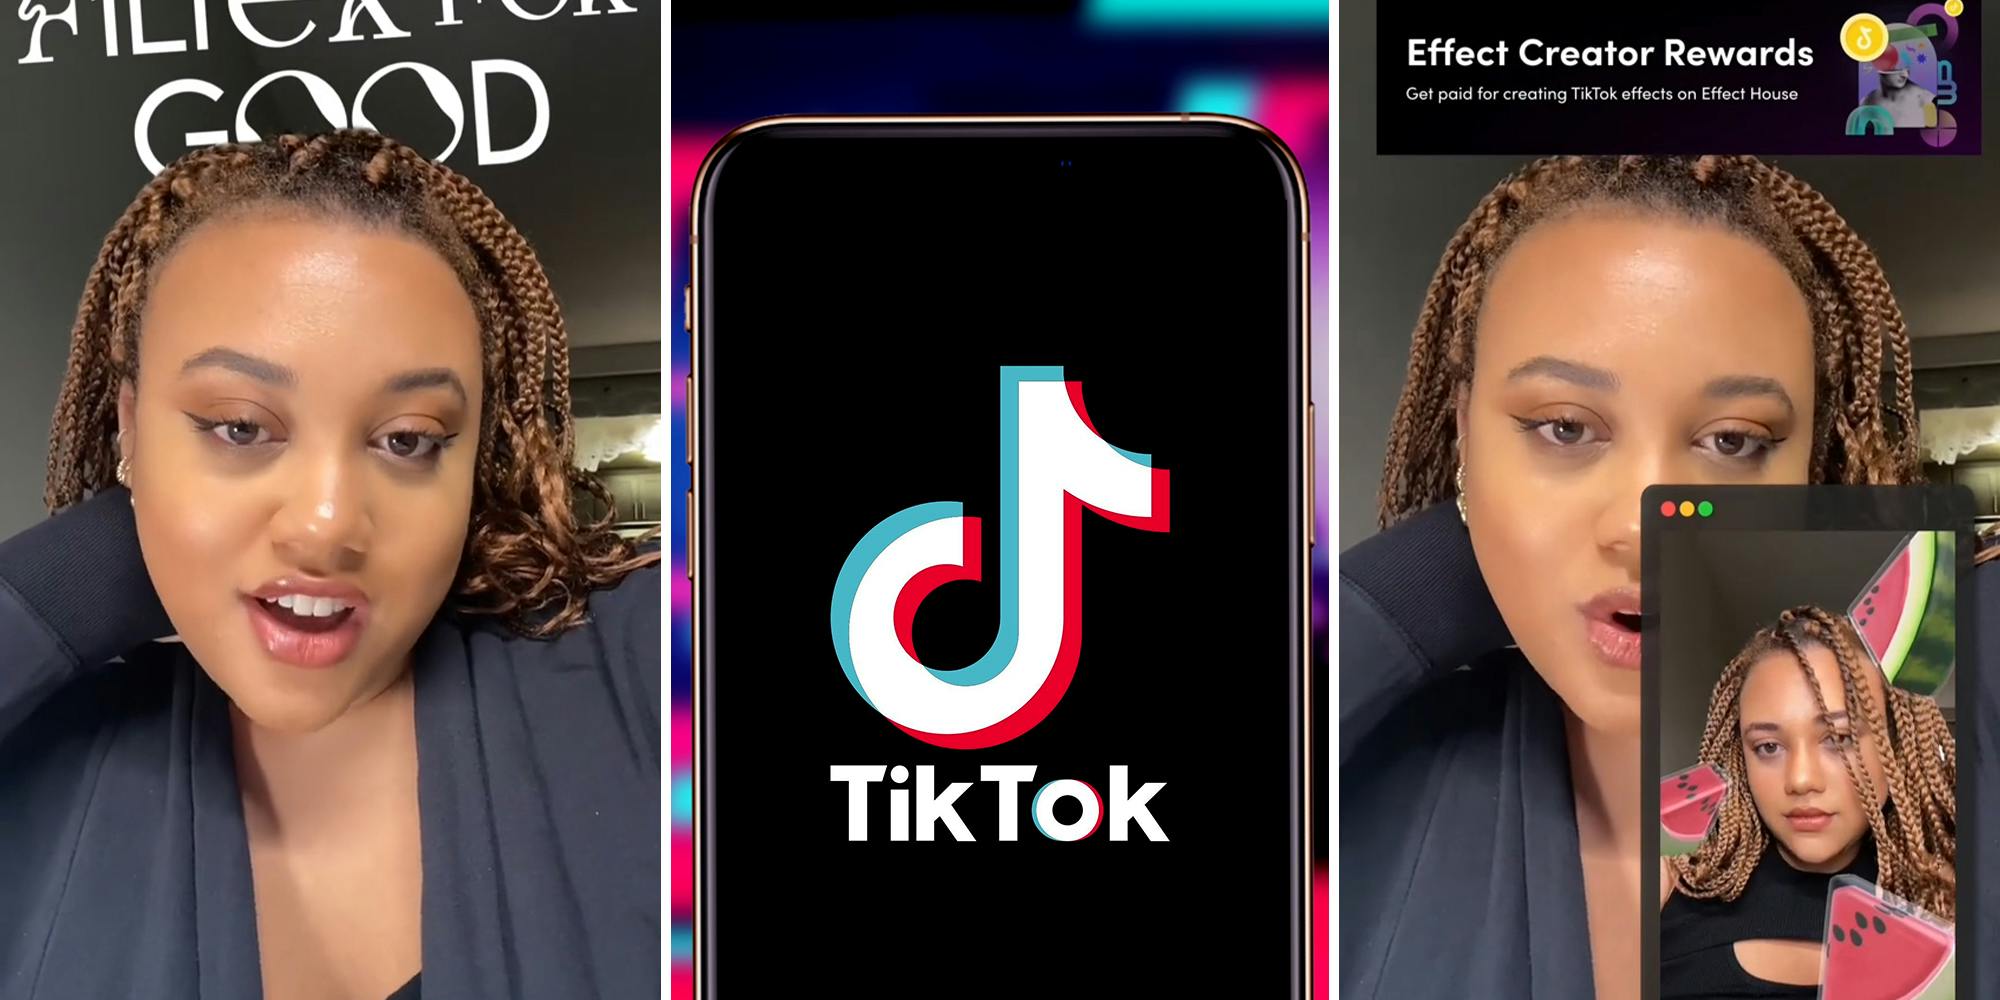 Creator of TikTok filter says she'll donate all earnings to Gaza